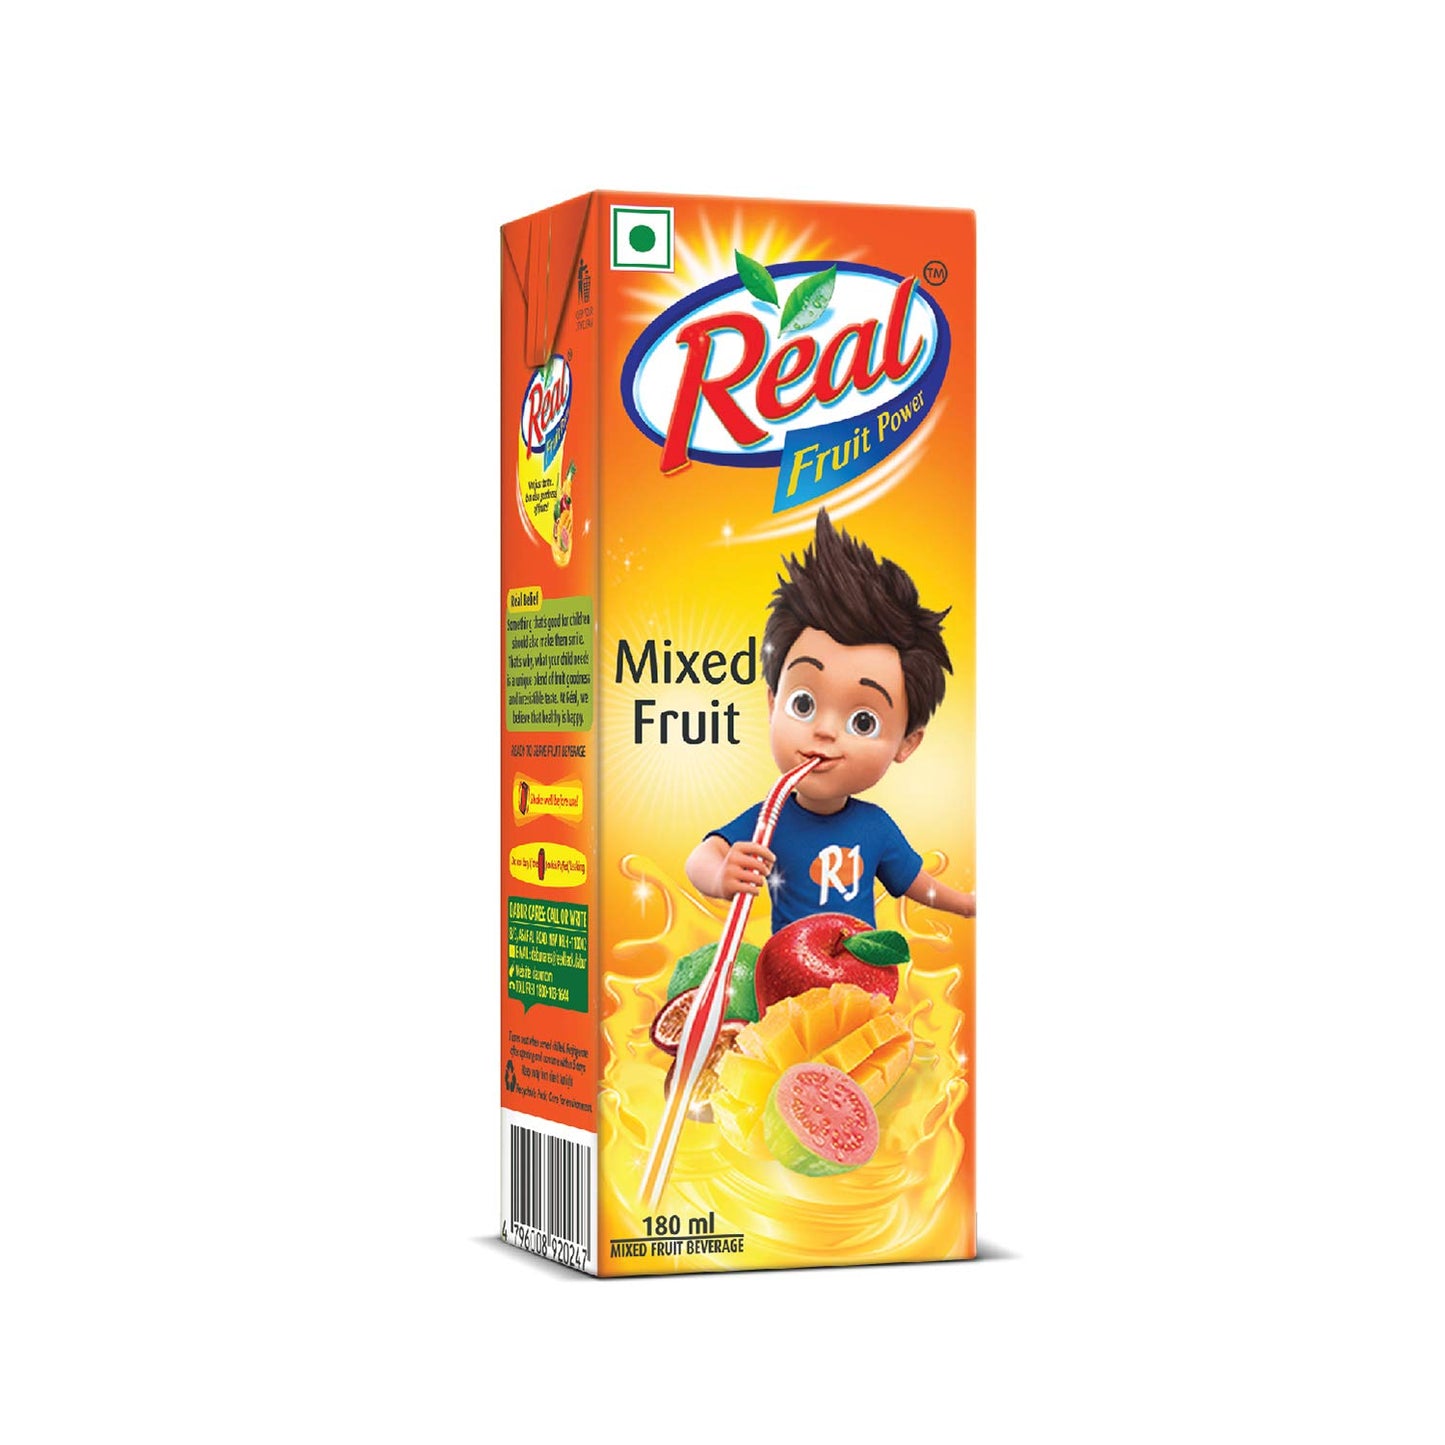 Real Mixed Fruit Fruit Drink - No Added Preservatives